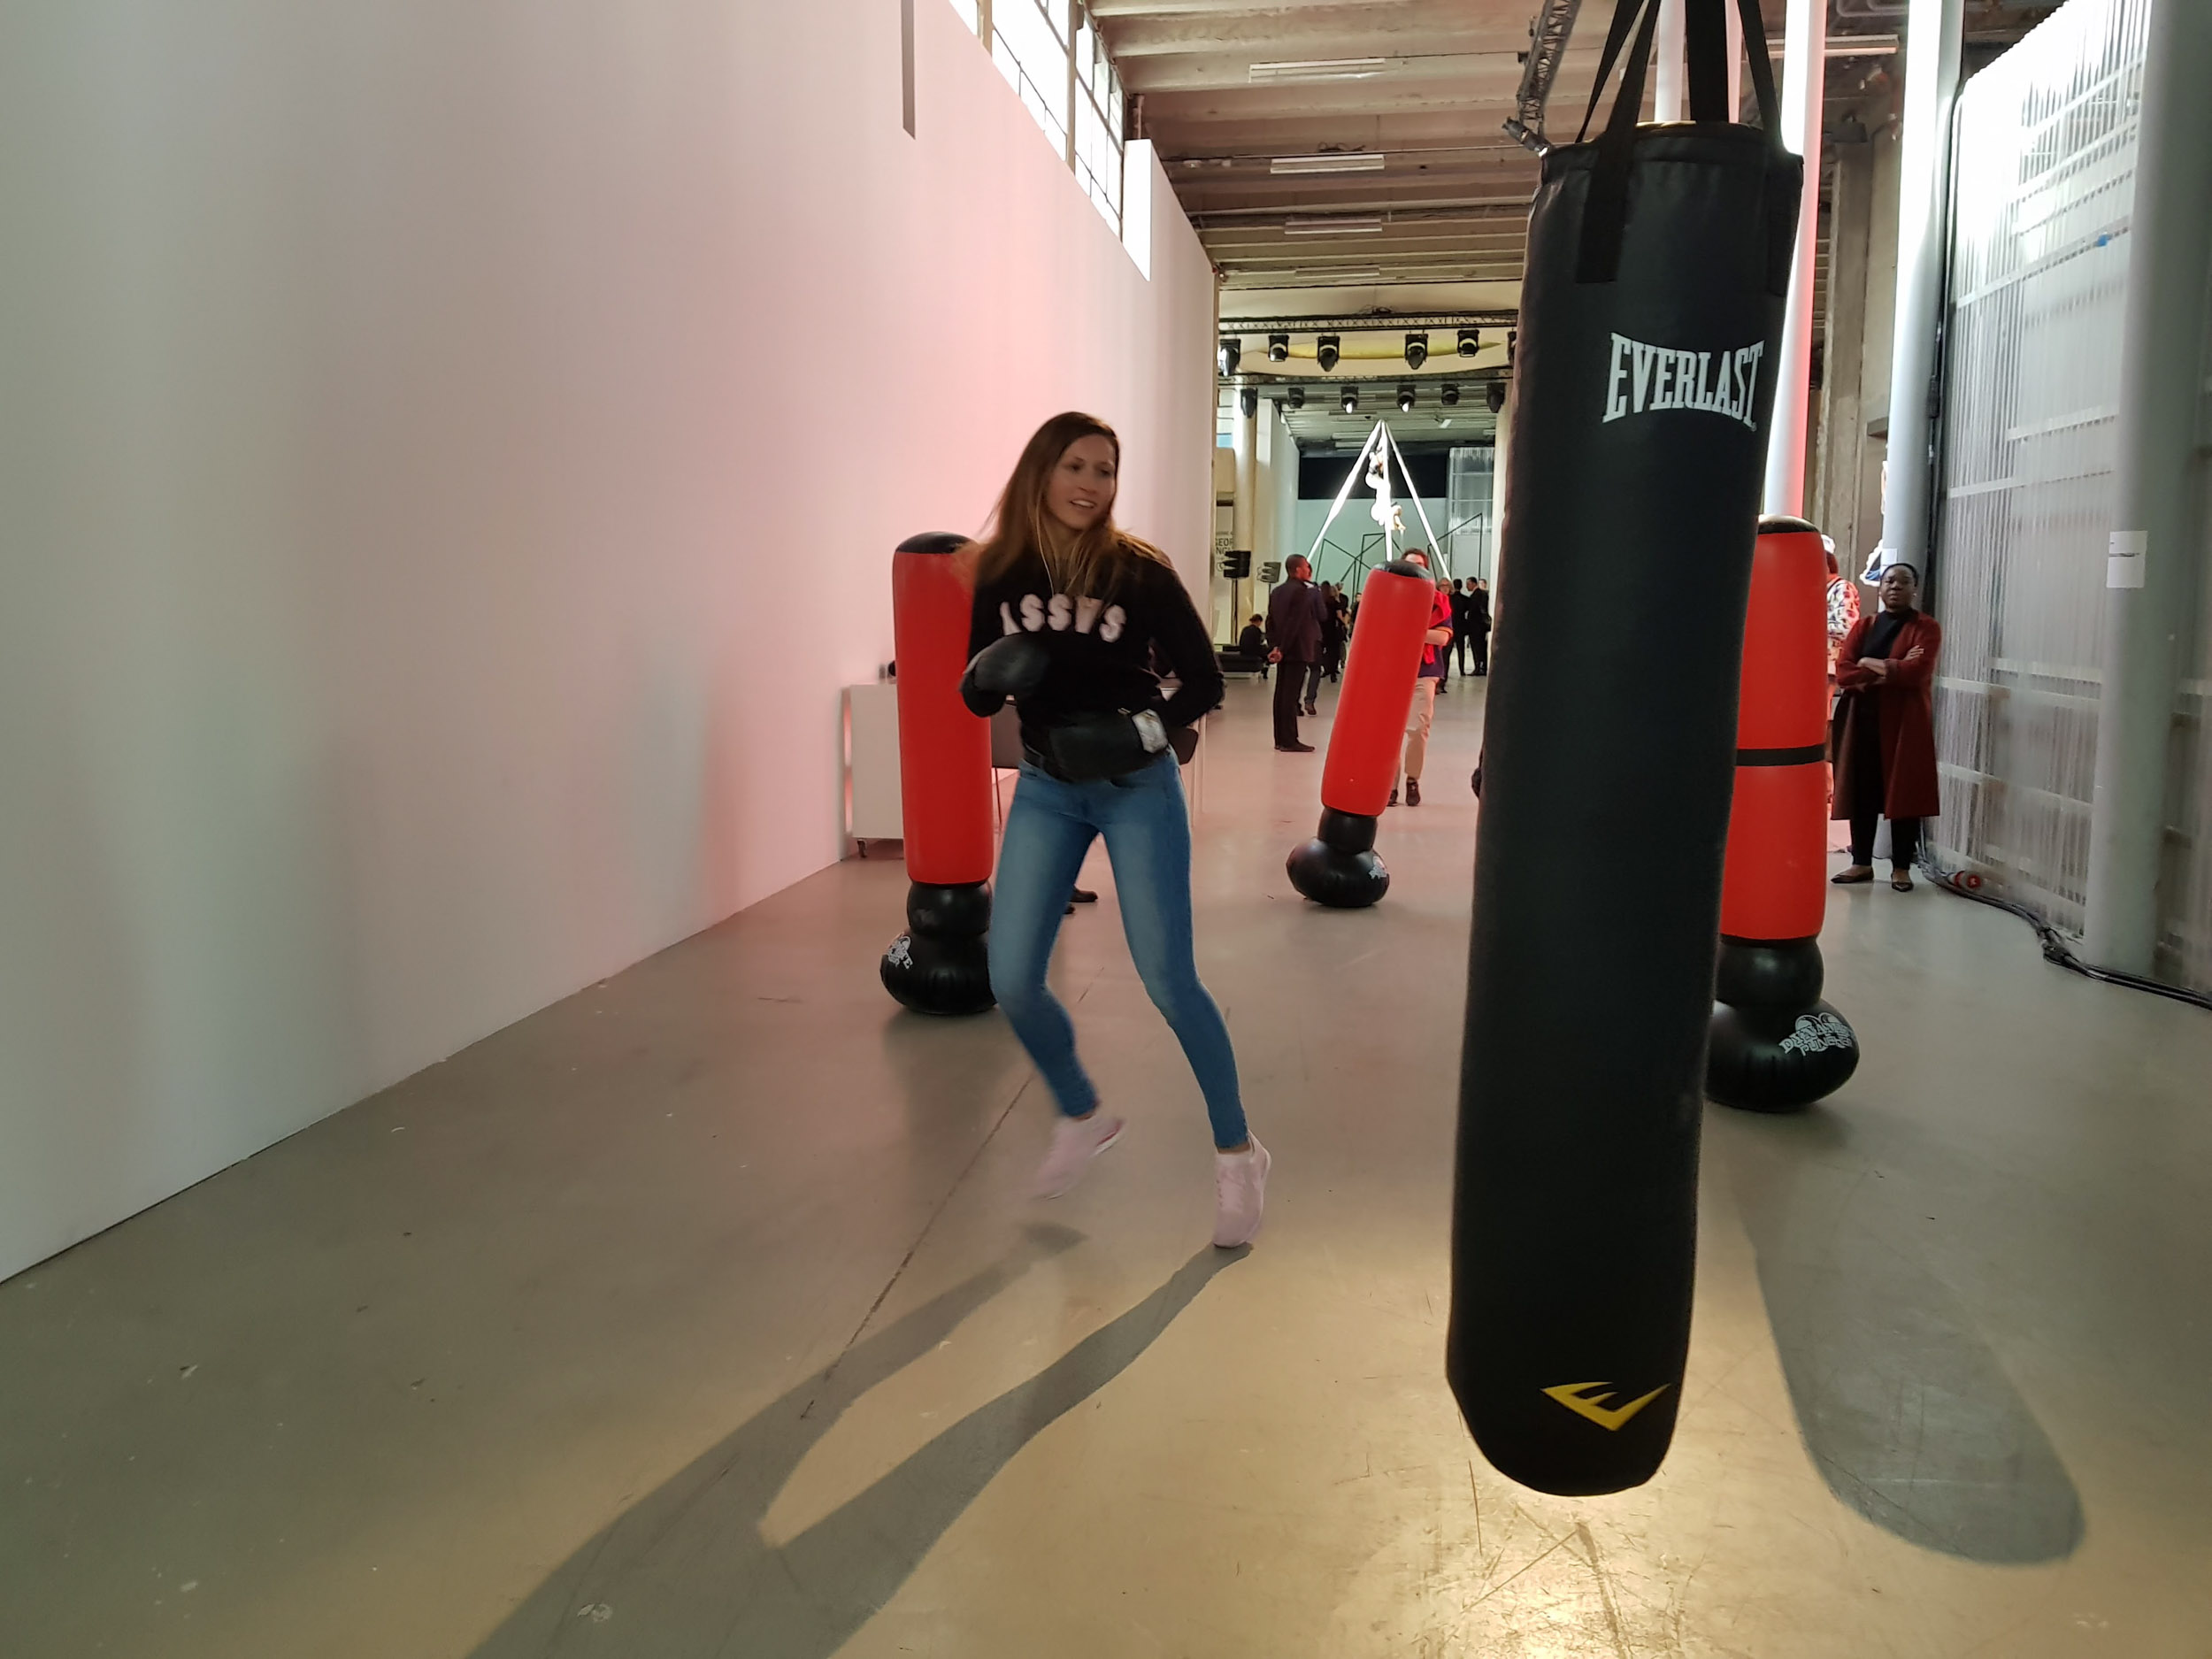  Female athletes of MMA (Mixed Martial Arts, a hybrid combat sport also known as «free-fight» or «ultimate fighting») perform free-fight movements on the punching bags.  The role-playing rule of the installation is that only women are allowed to phys